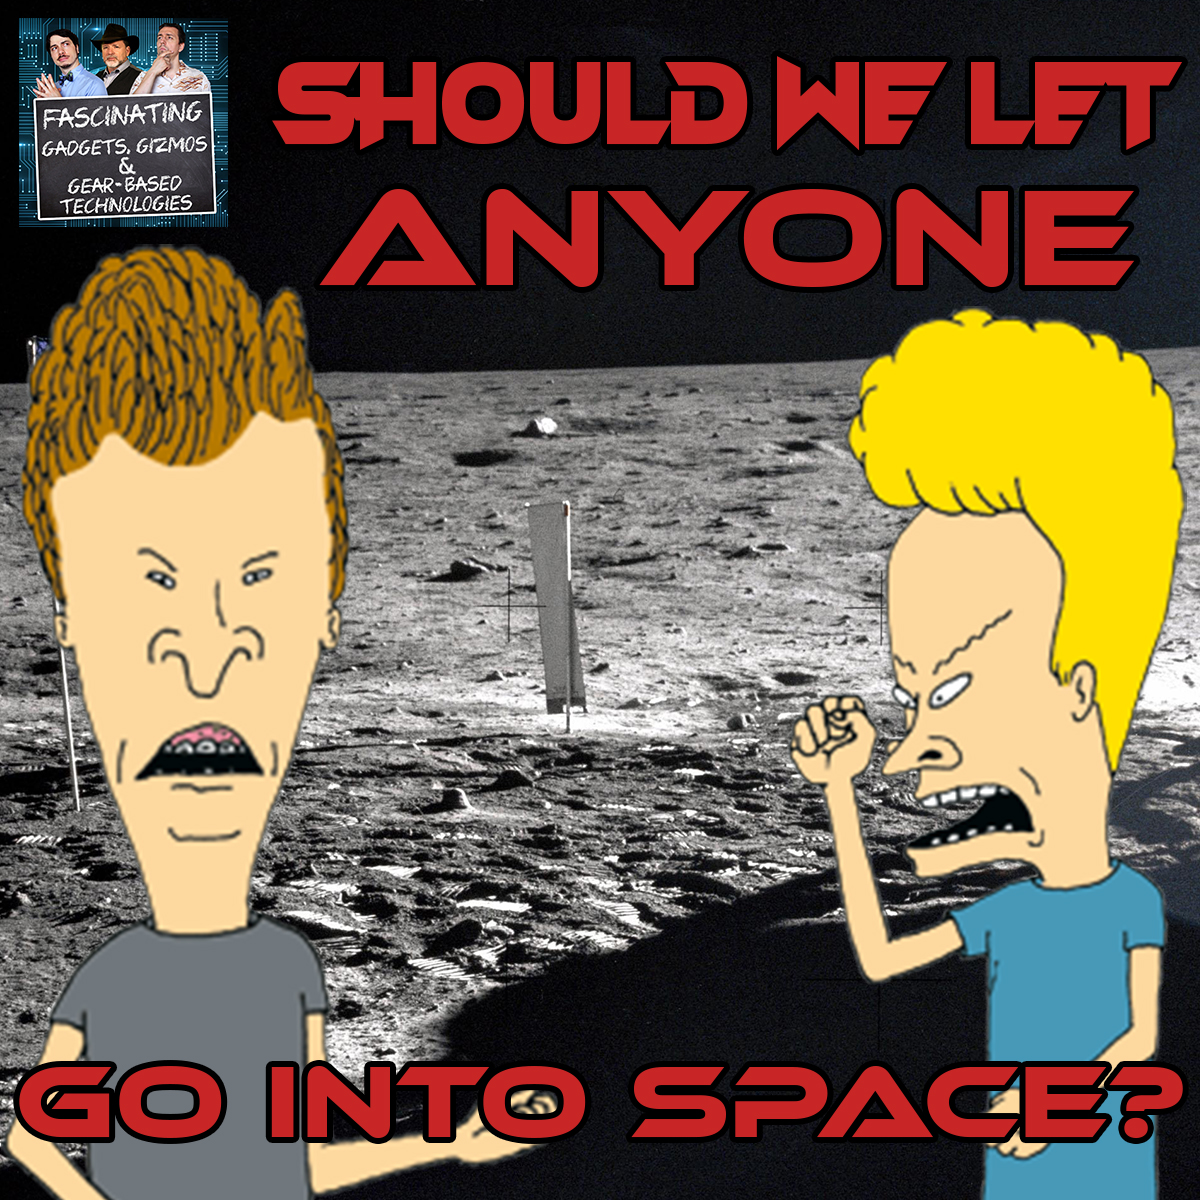 You are currently viewing Ep. 136: Should We Let ANYONE Go Into Space?